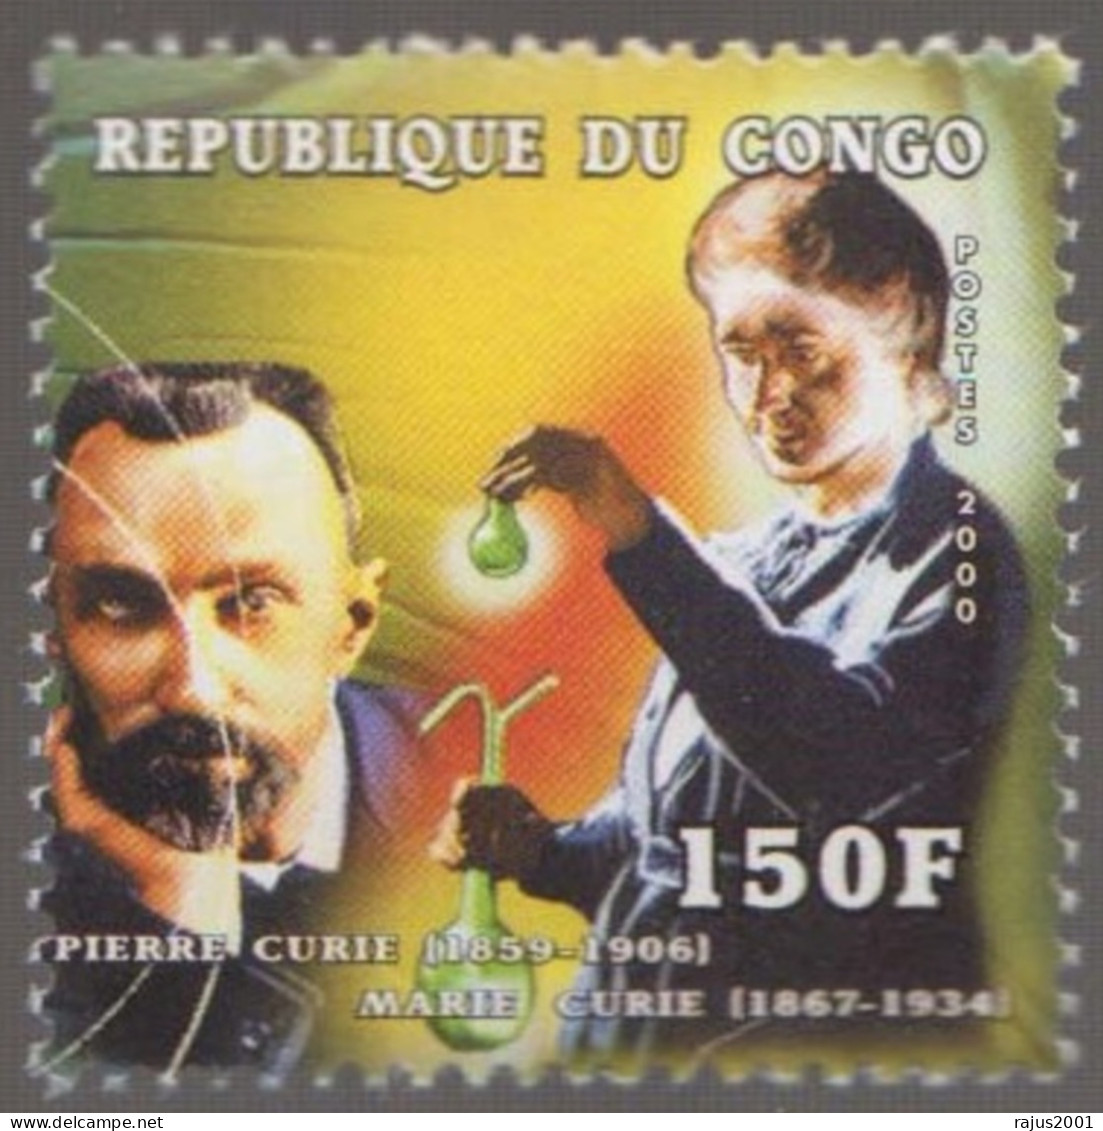 Pierre And Marie Curie, Discovery Of Radium And Polonium Nobel Prize Cancer Disease Chemistry Physics MNH Congo - Chemistry